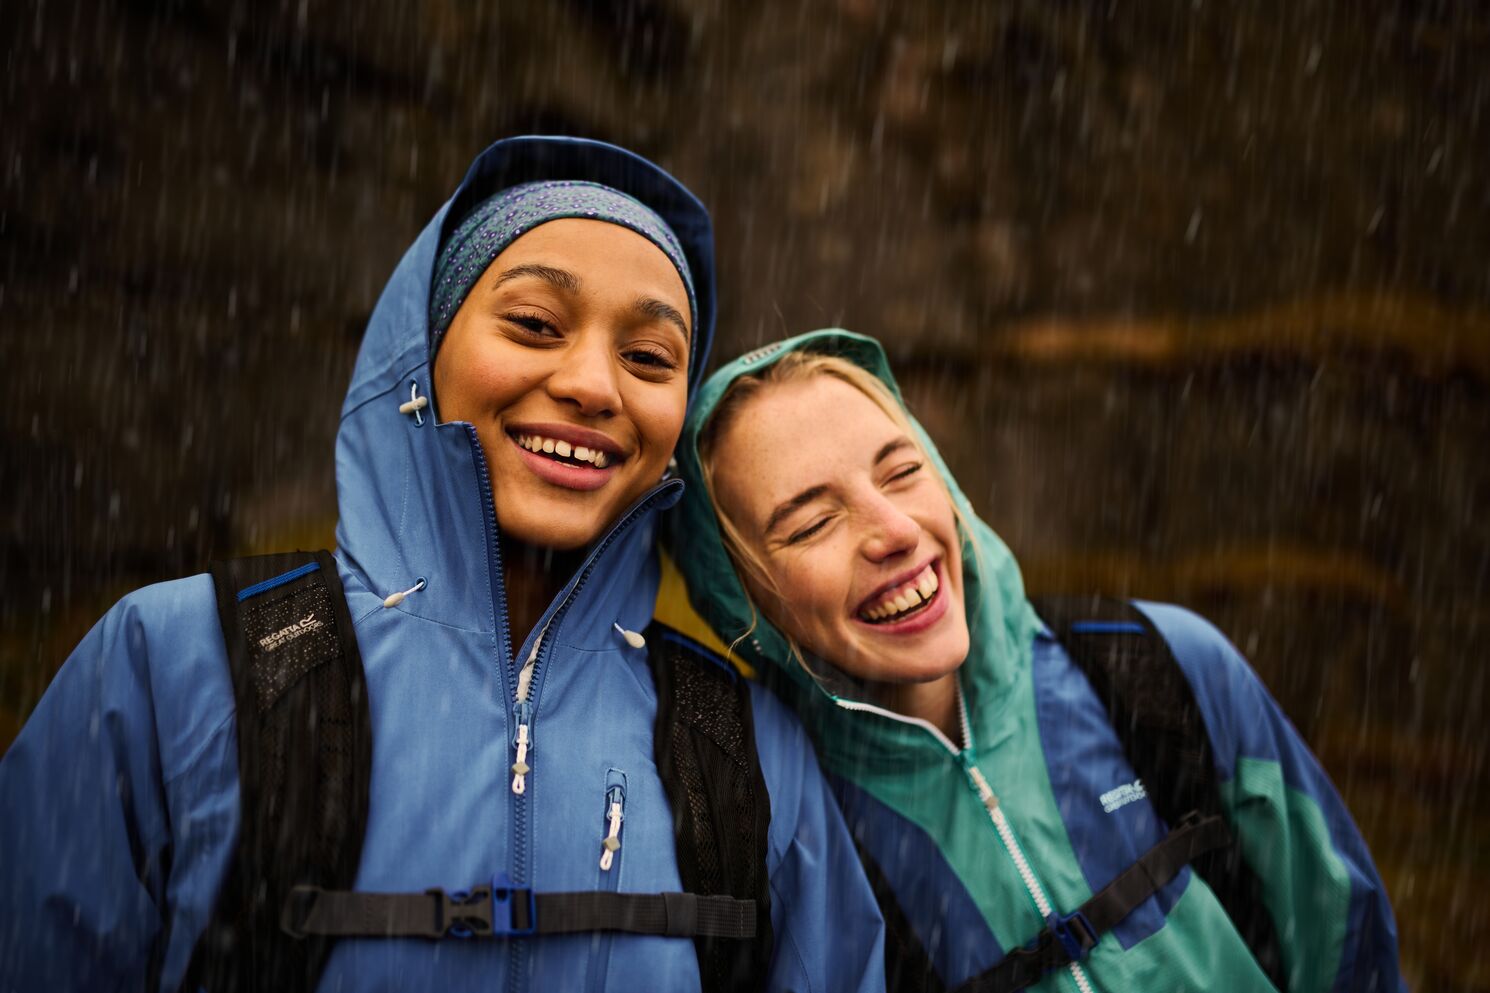 A woman leaning against another woman's shoulder whilst smiling, wearing waterproof jackets in the rain.